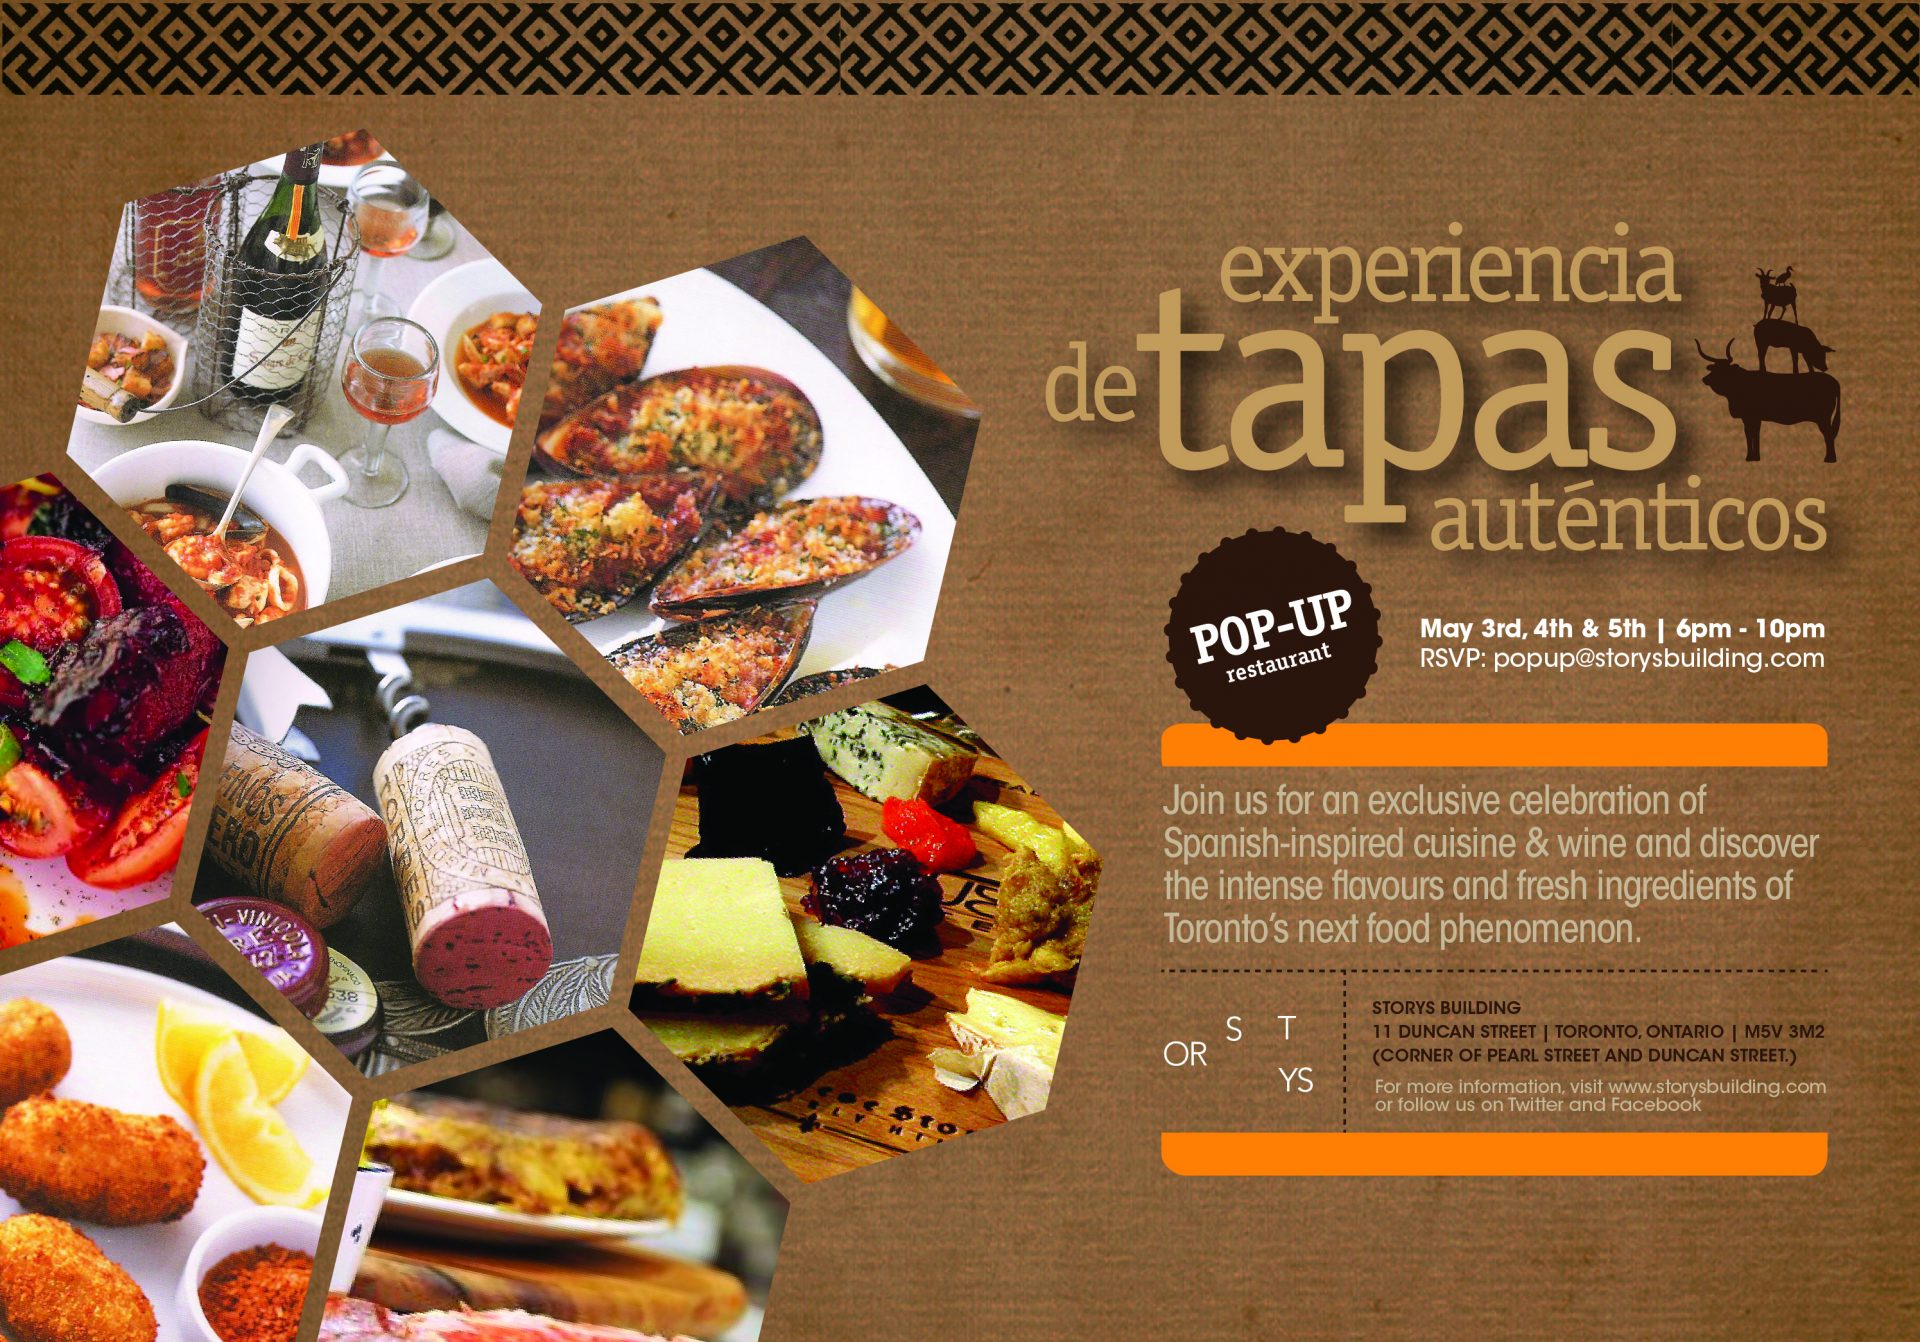 Pop-up Spanish Tapas May 3rd to 5th